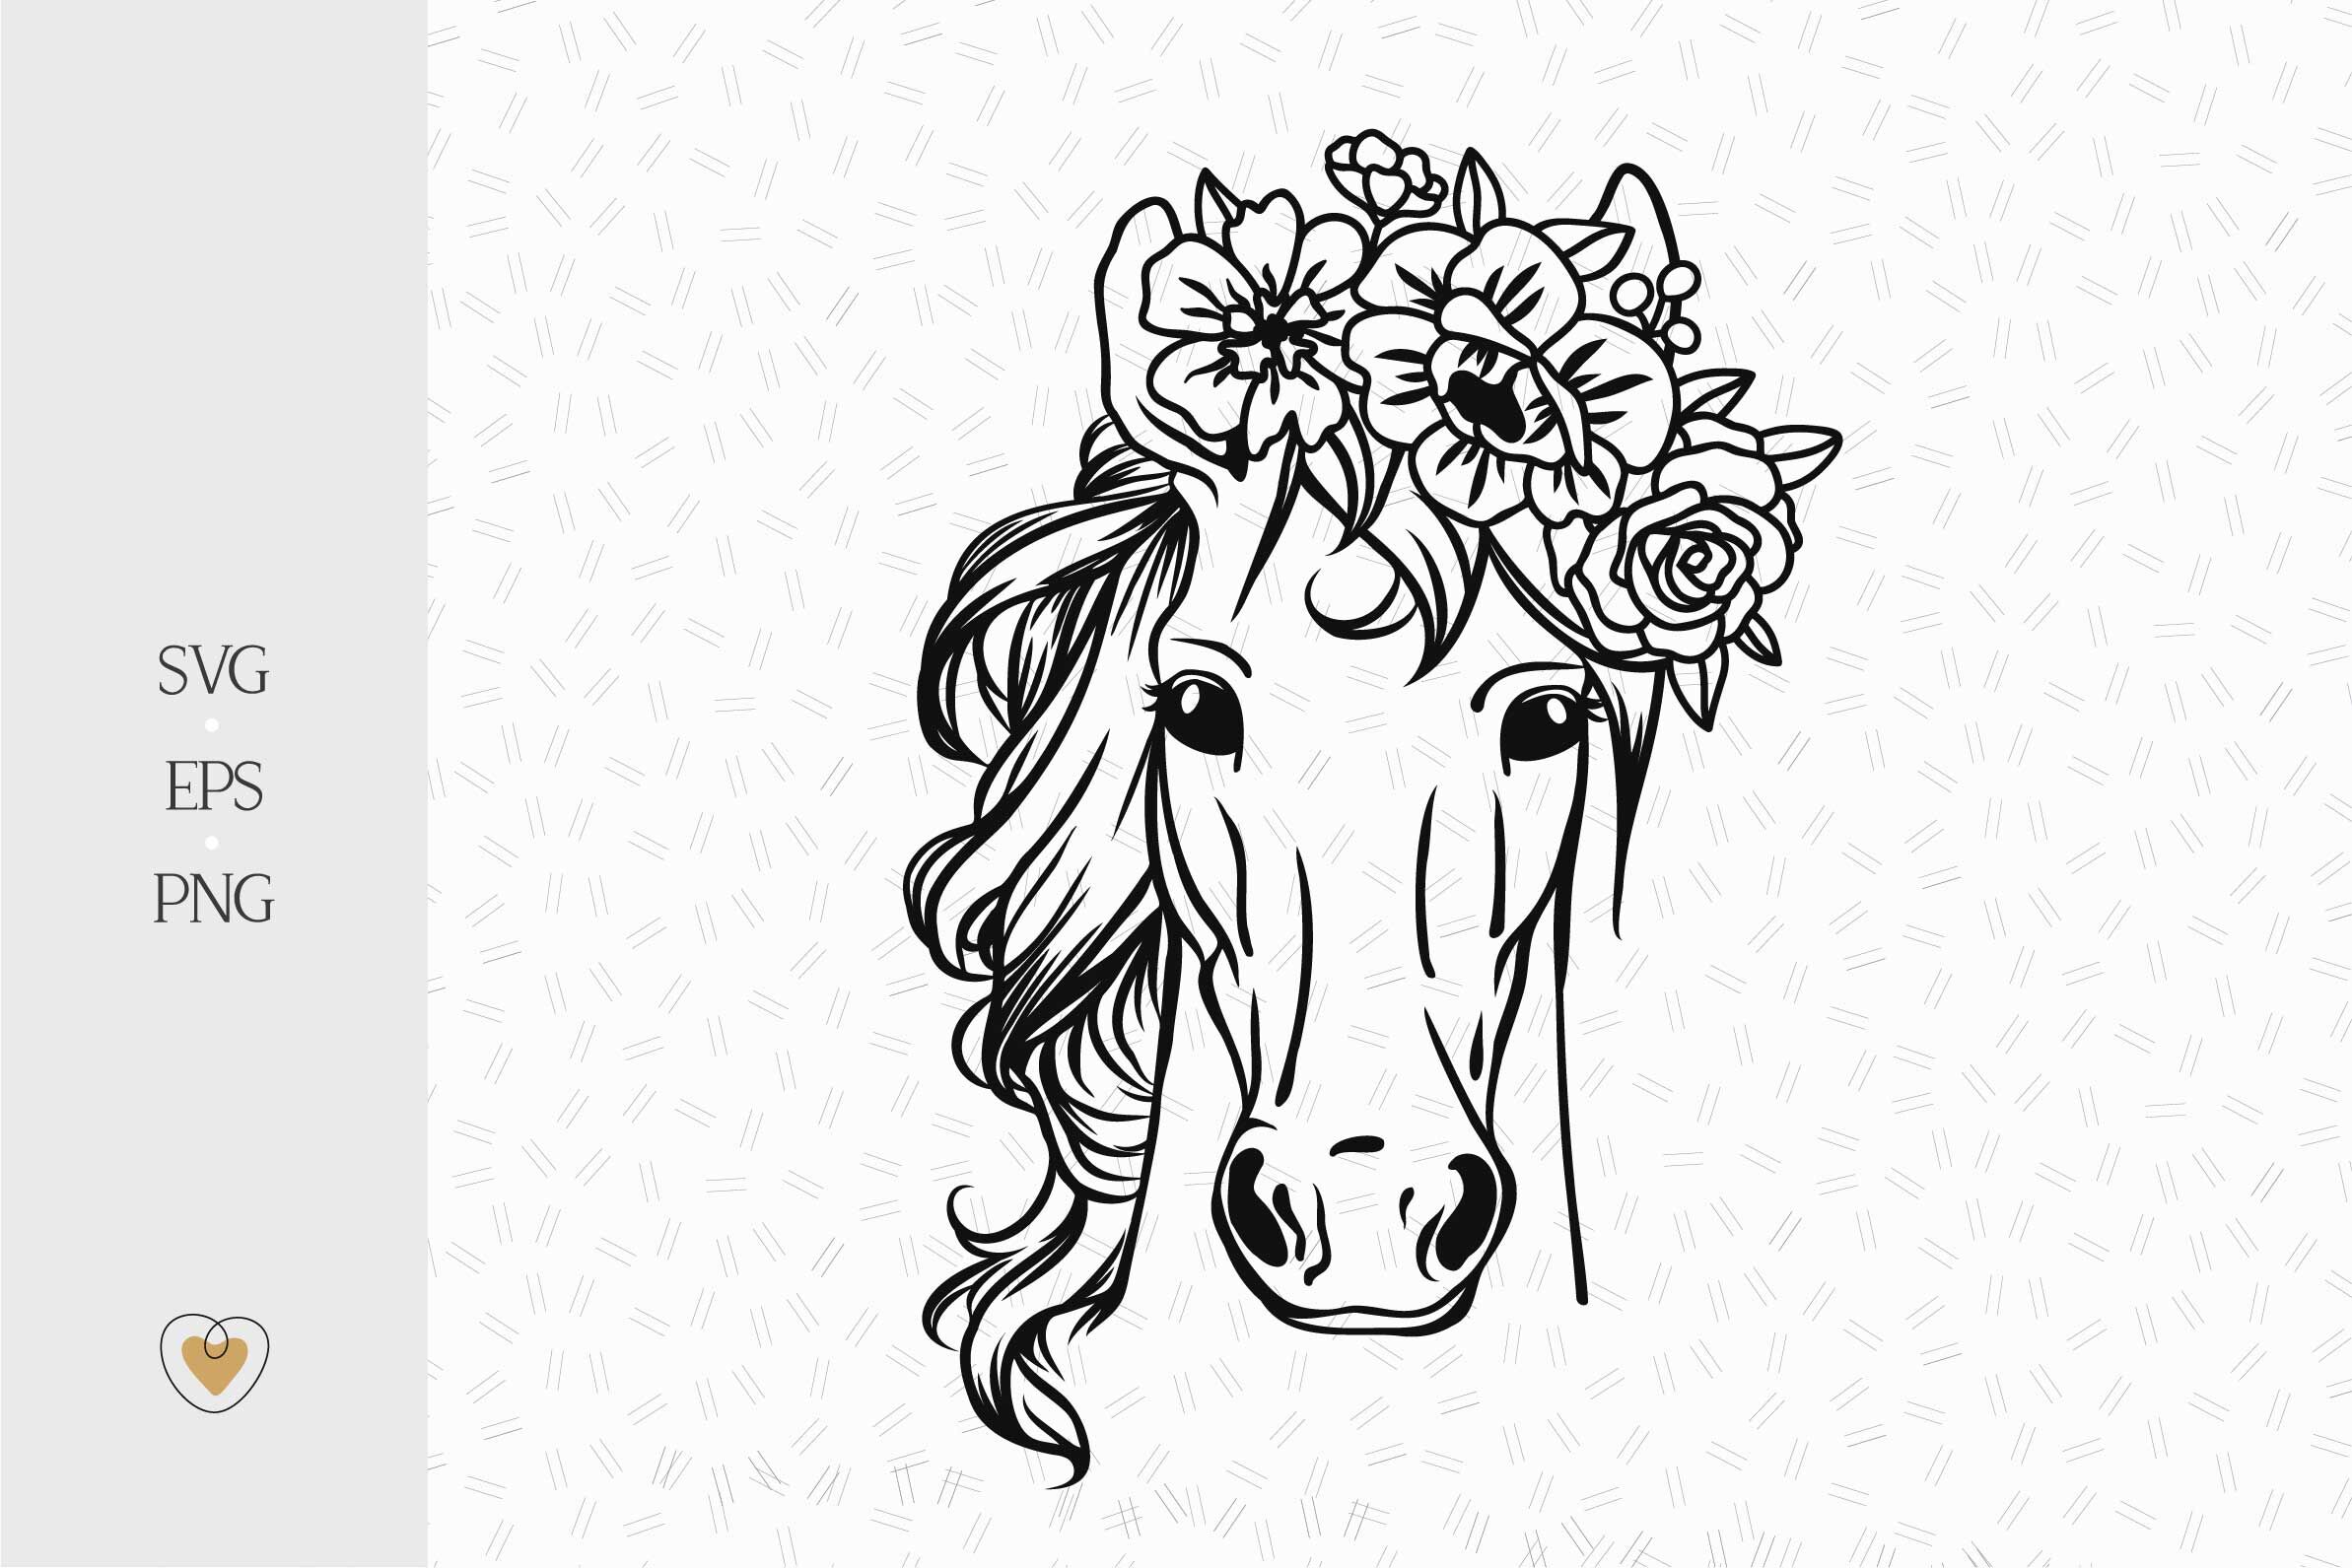 Horse with flower crown svg, Floral horse svg, Horse head By Pretty